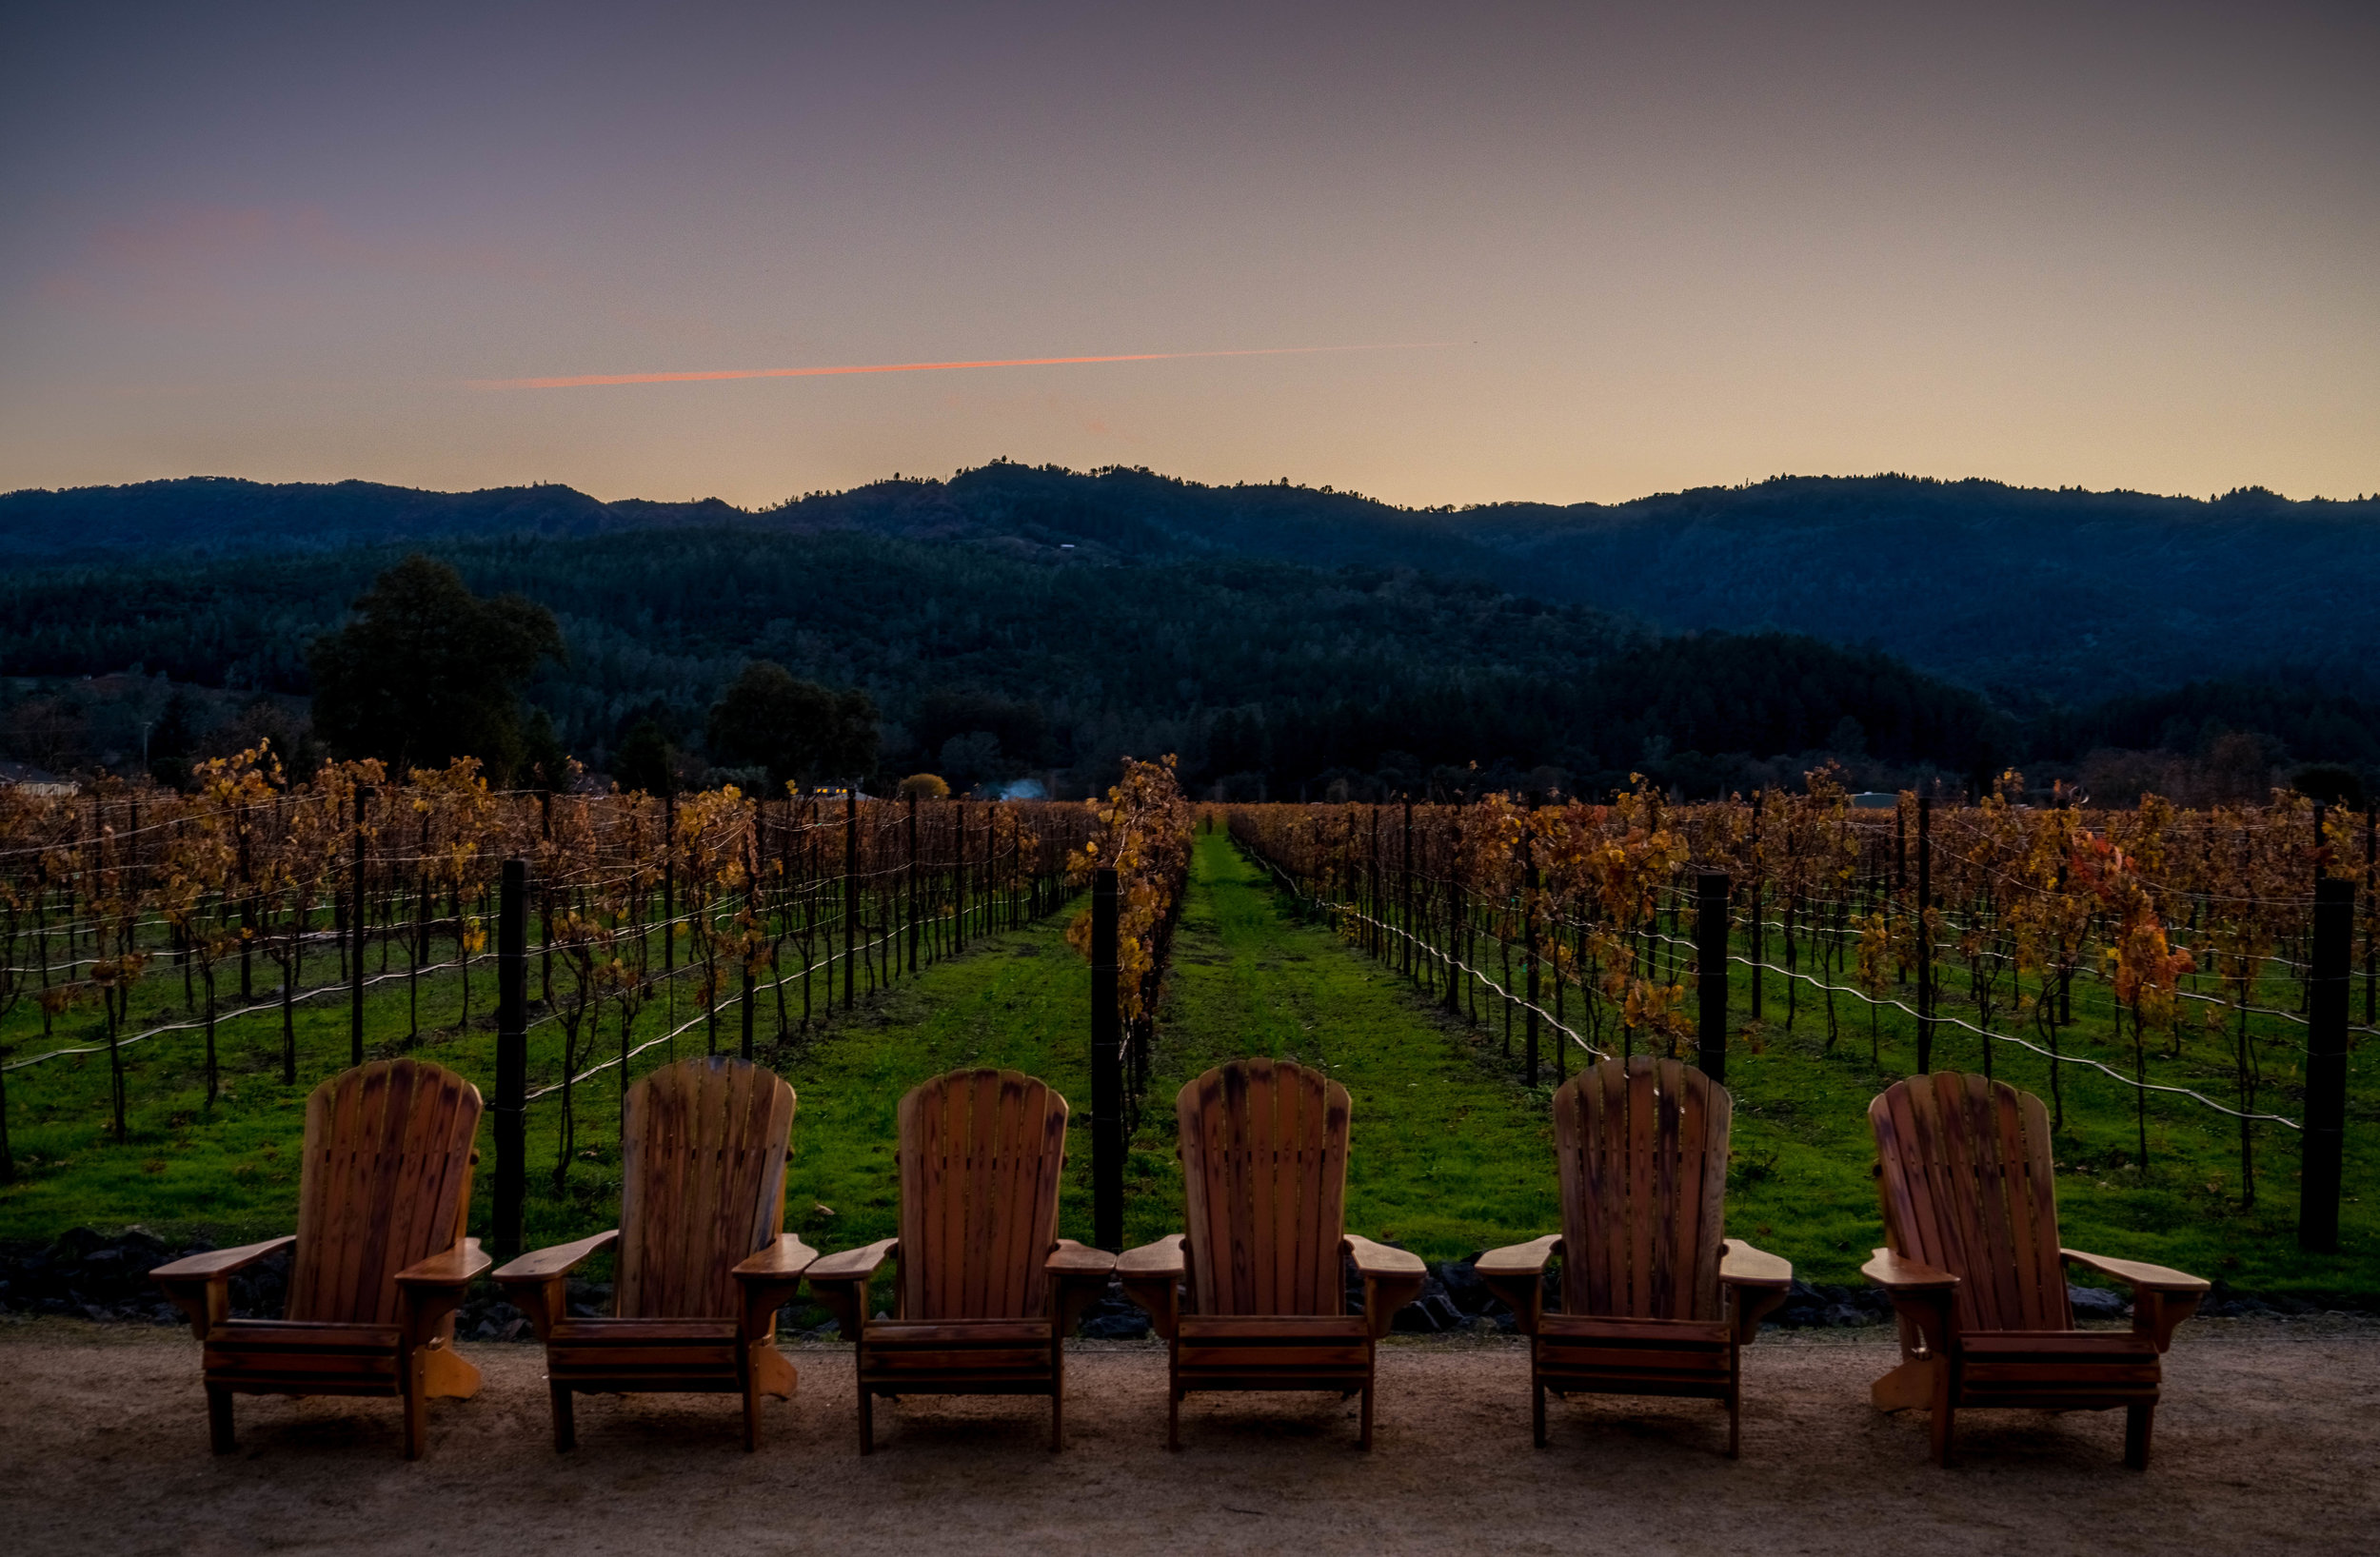 Copy of views from Hall Vineyard and Winery in Napa, CA